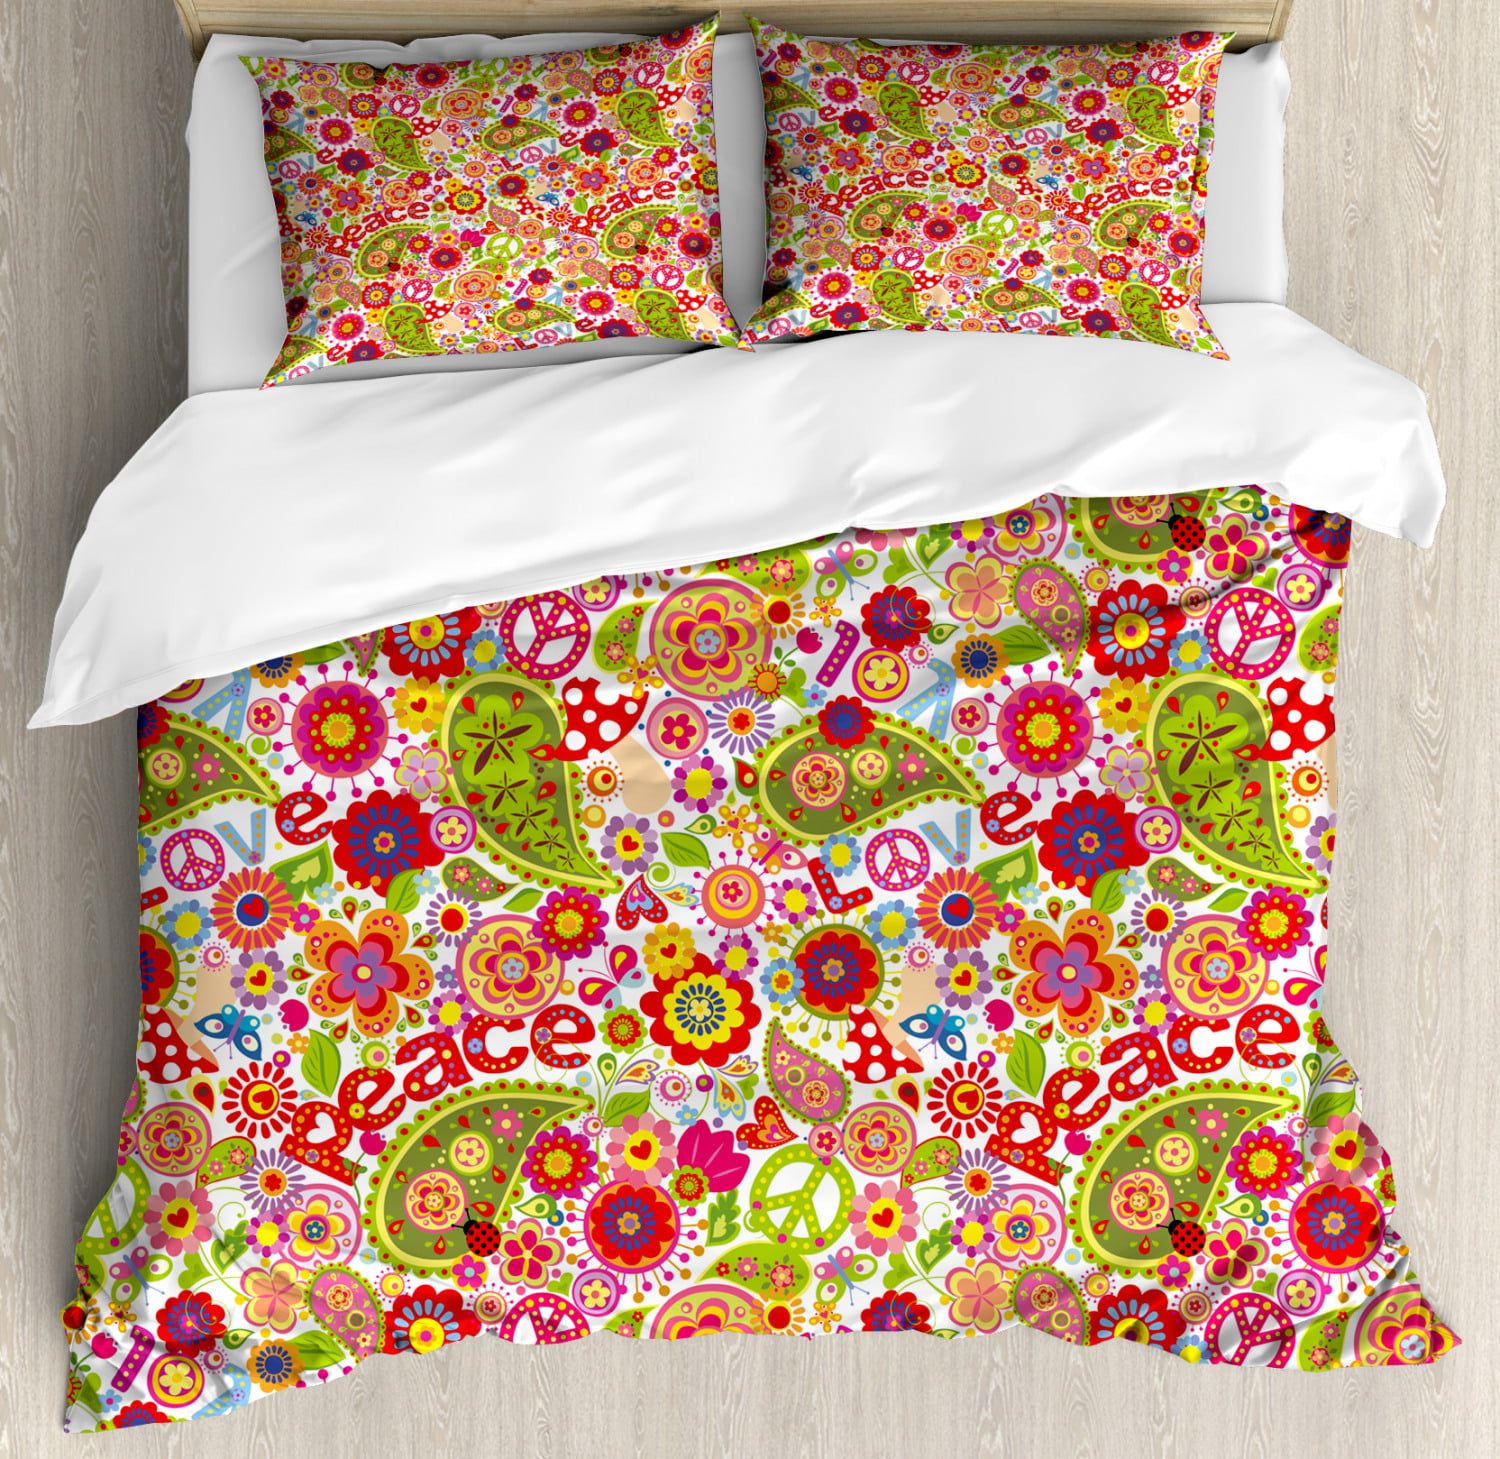 70s Party Duvet Cover Set, Festive Hippie Childish Composition of Mushrooms Poppies Peace Fun